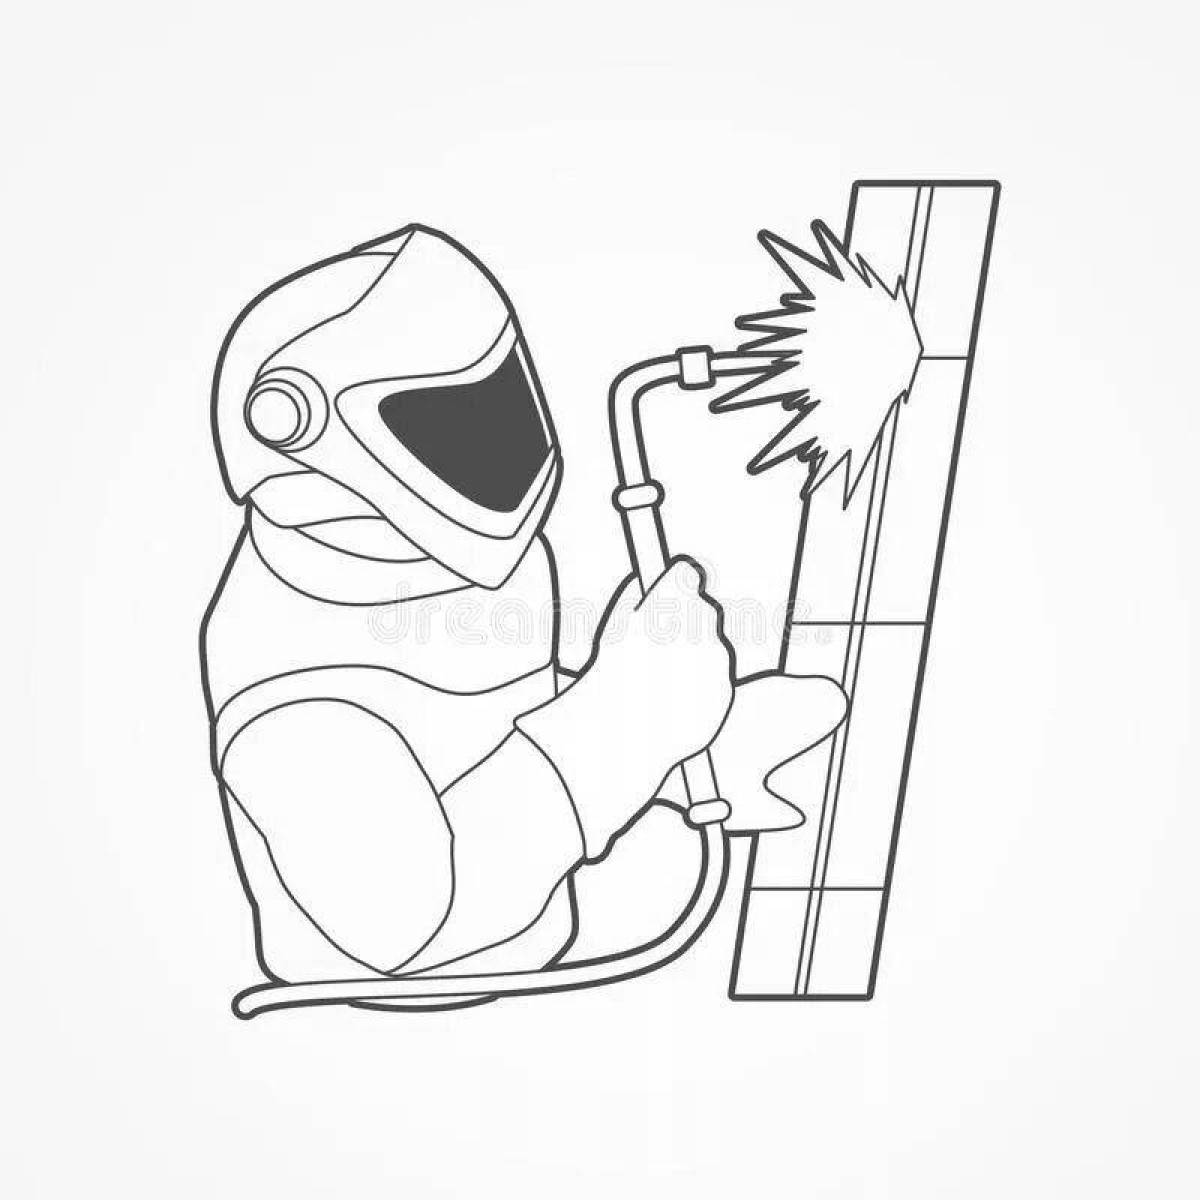 Colorful welder coloring page